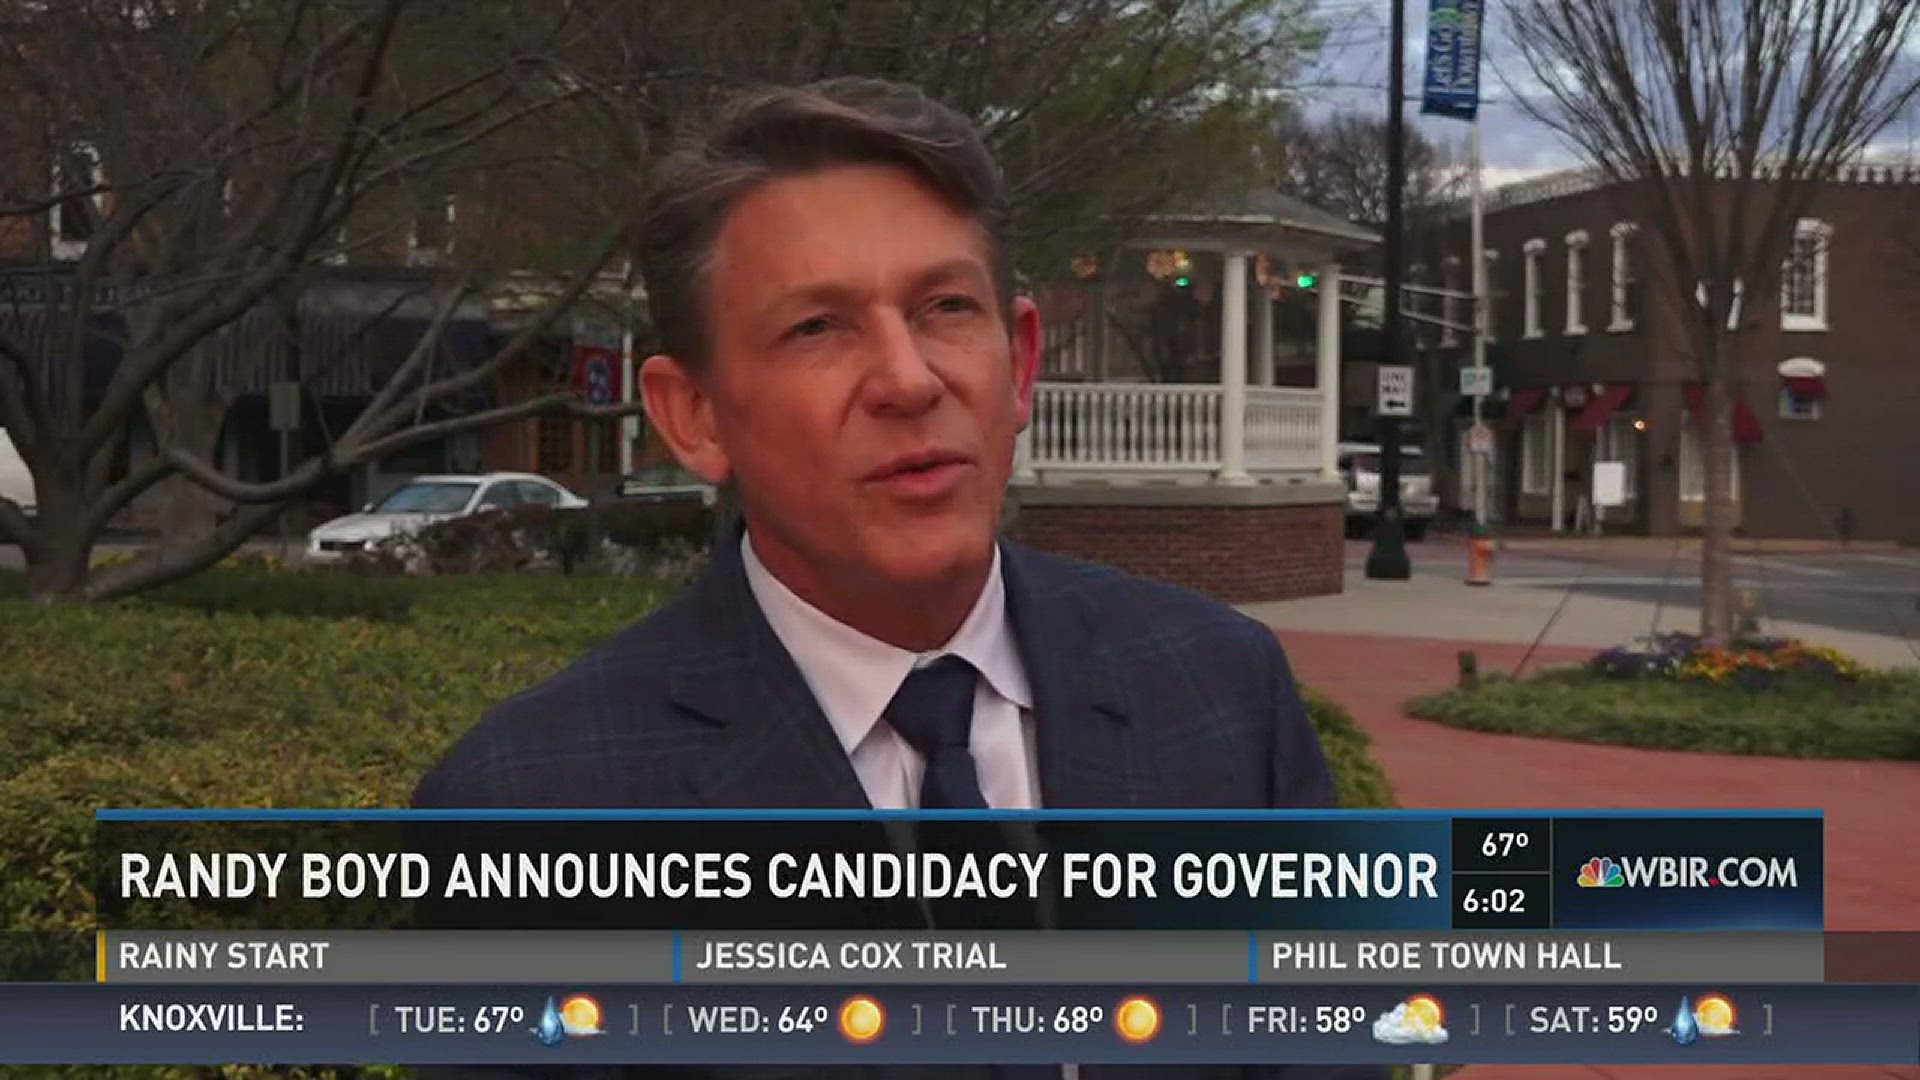 March 6, 2017: Knoxville businessman and philanthropist Randy Boyd announced his run for governor in 2018.